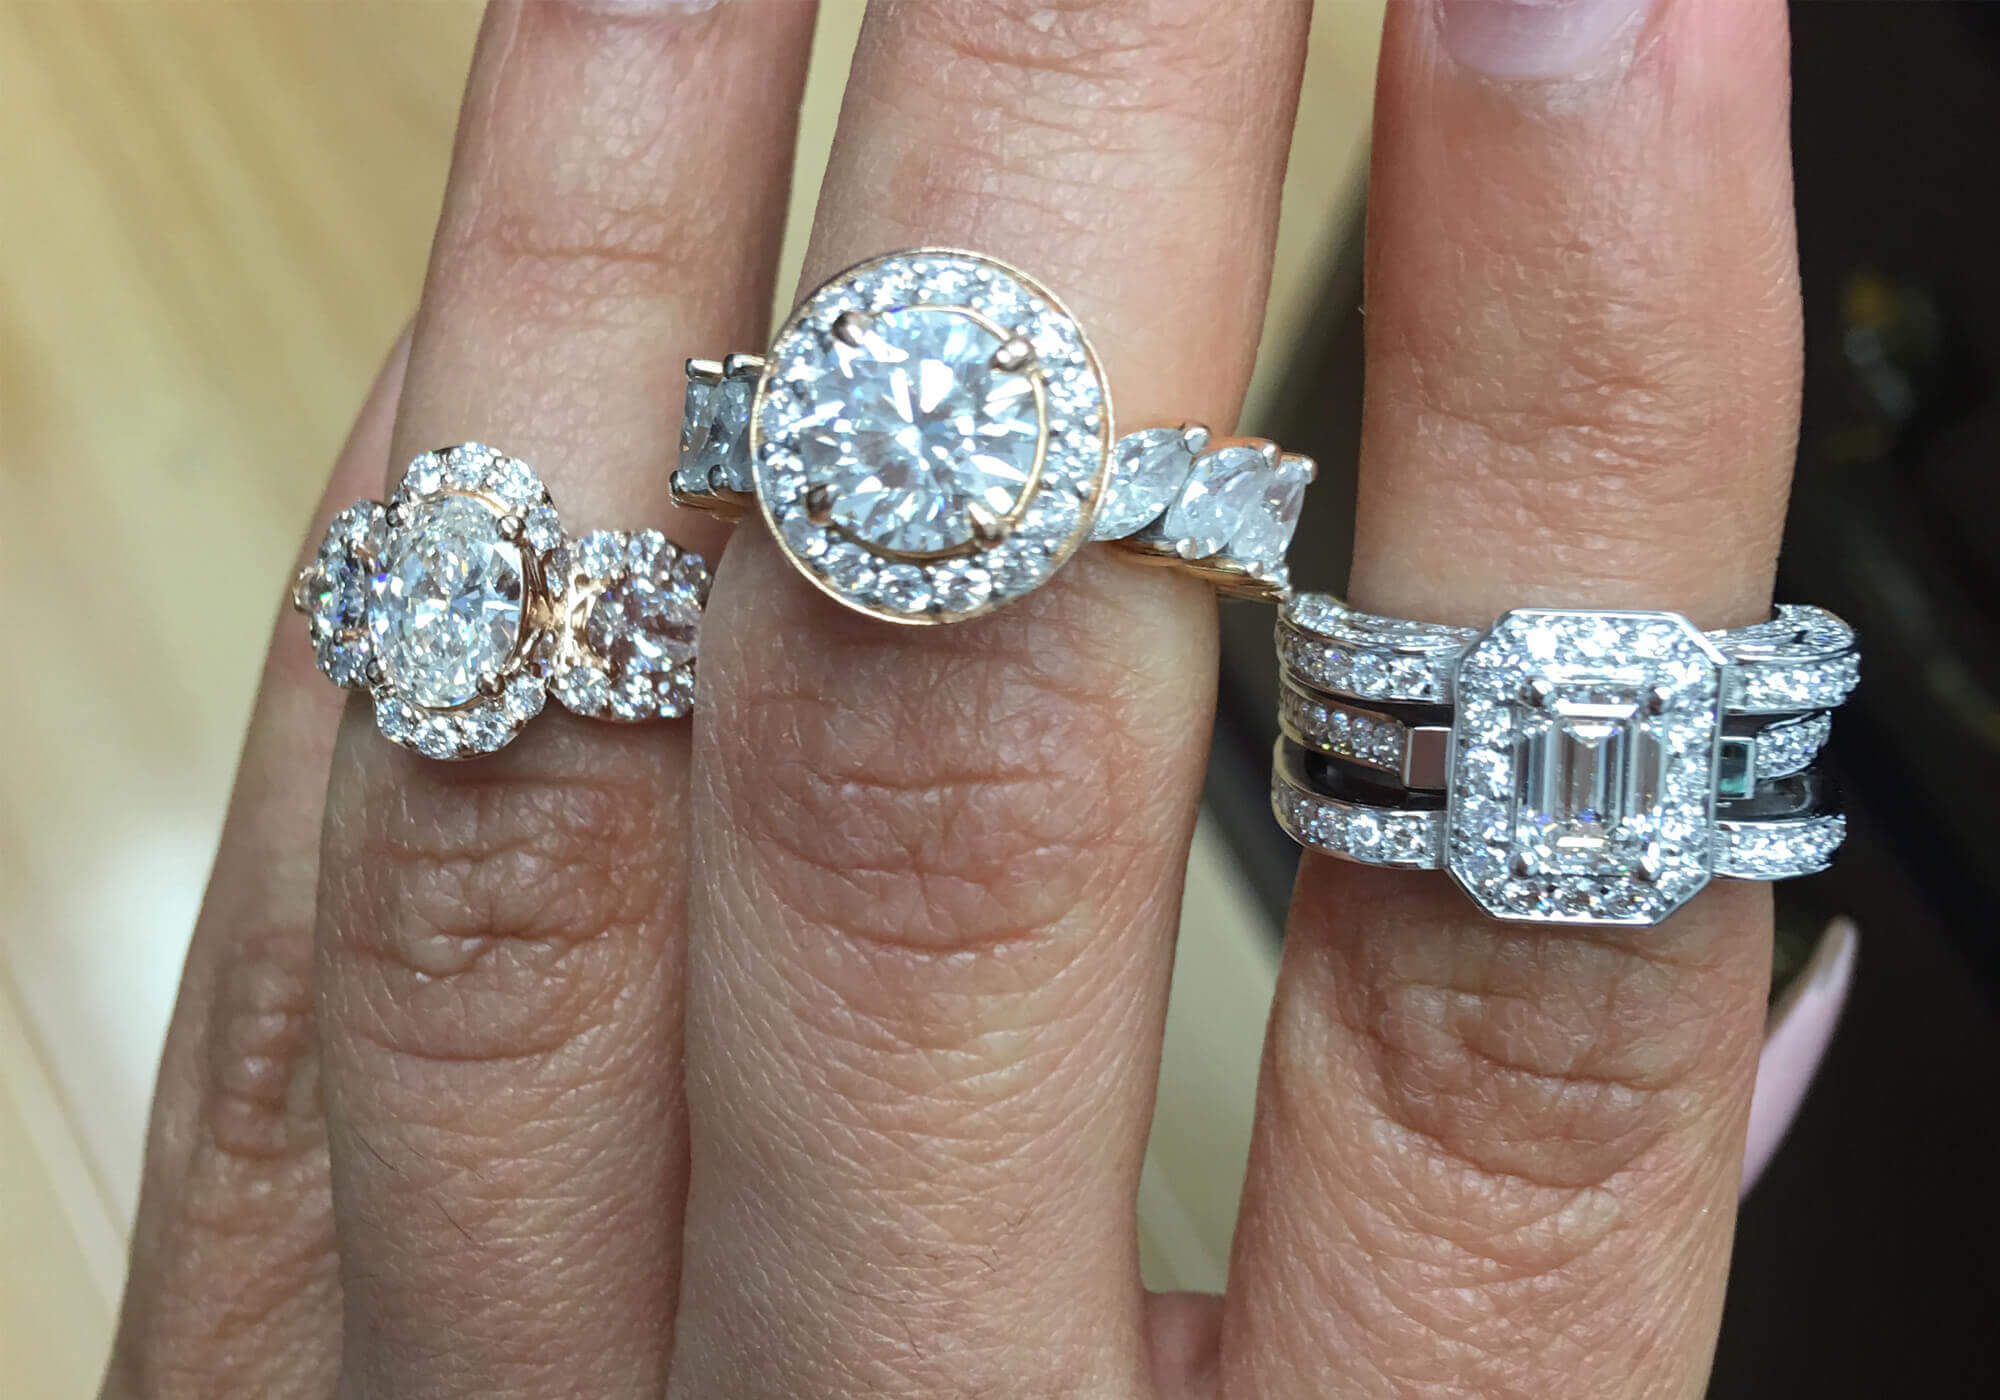 Choosing a style for your engagement ring